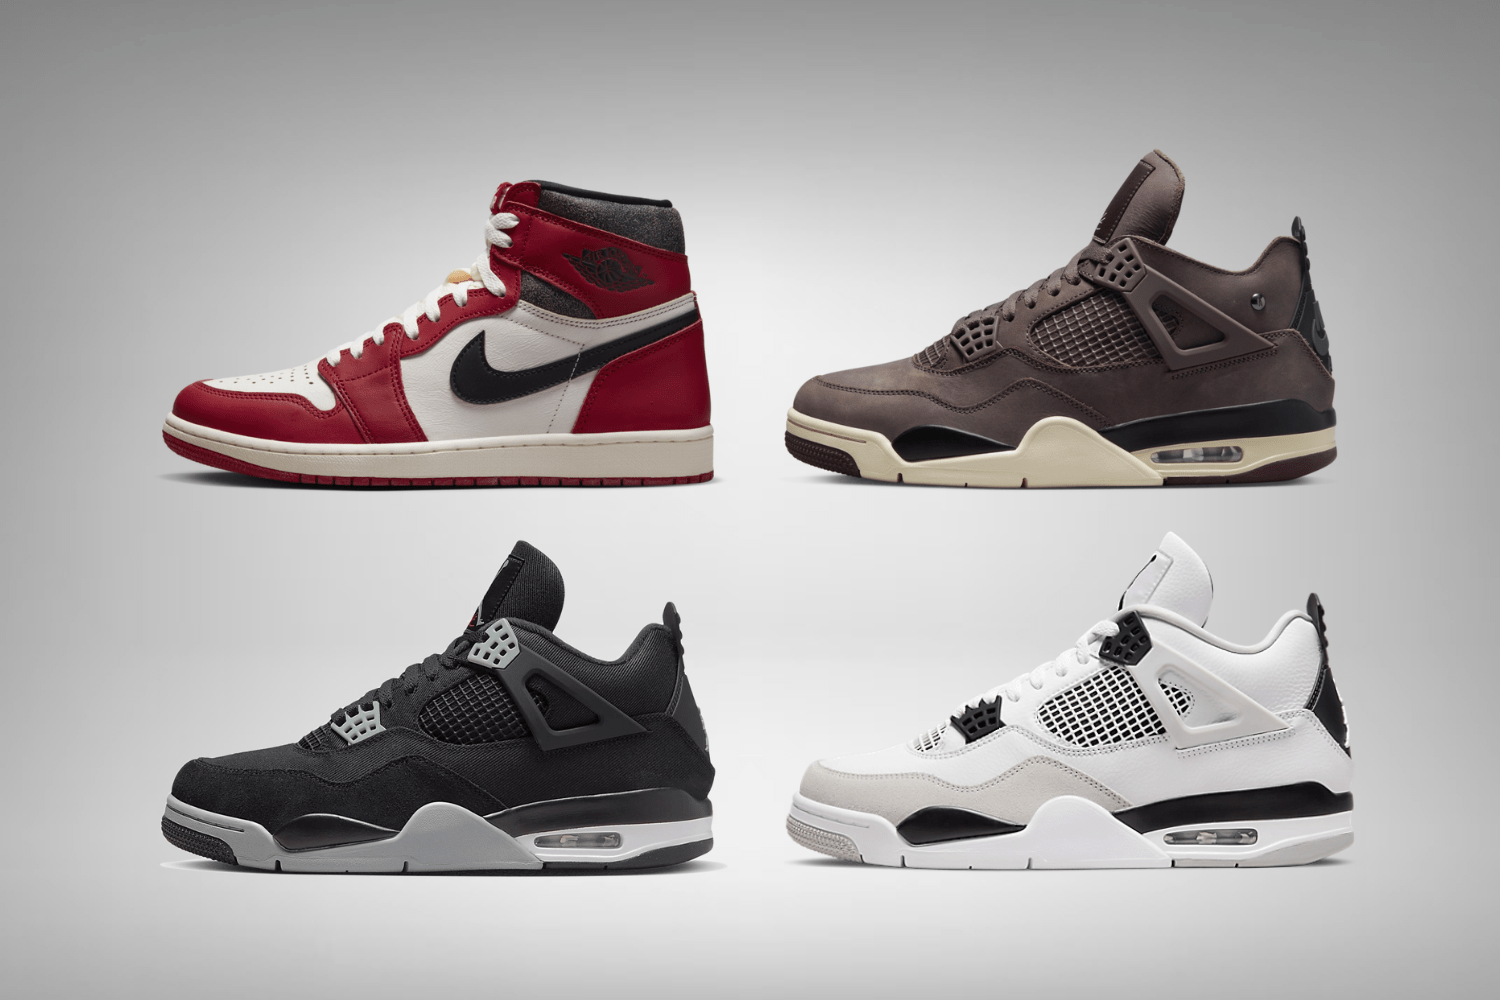 These sneakers will restock at Nike SNKRS